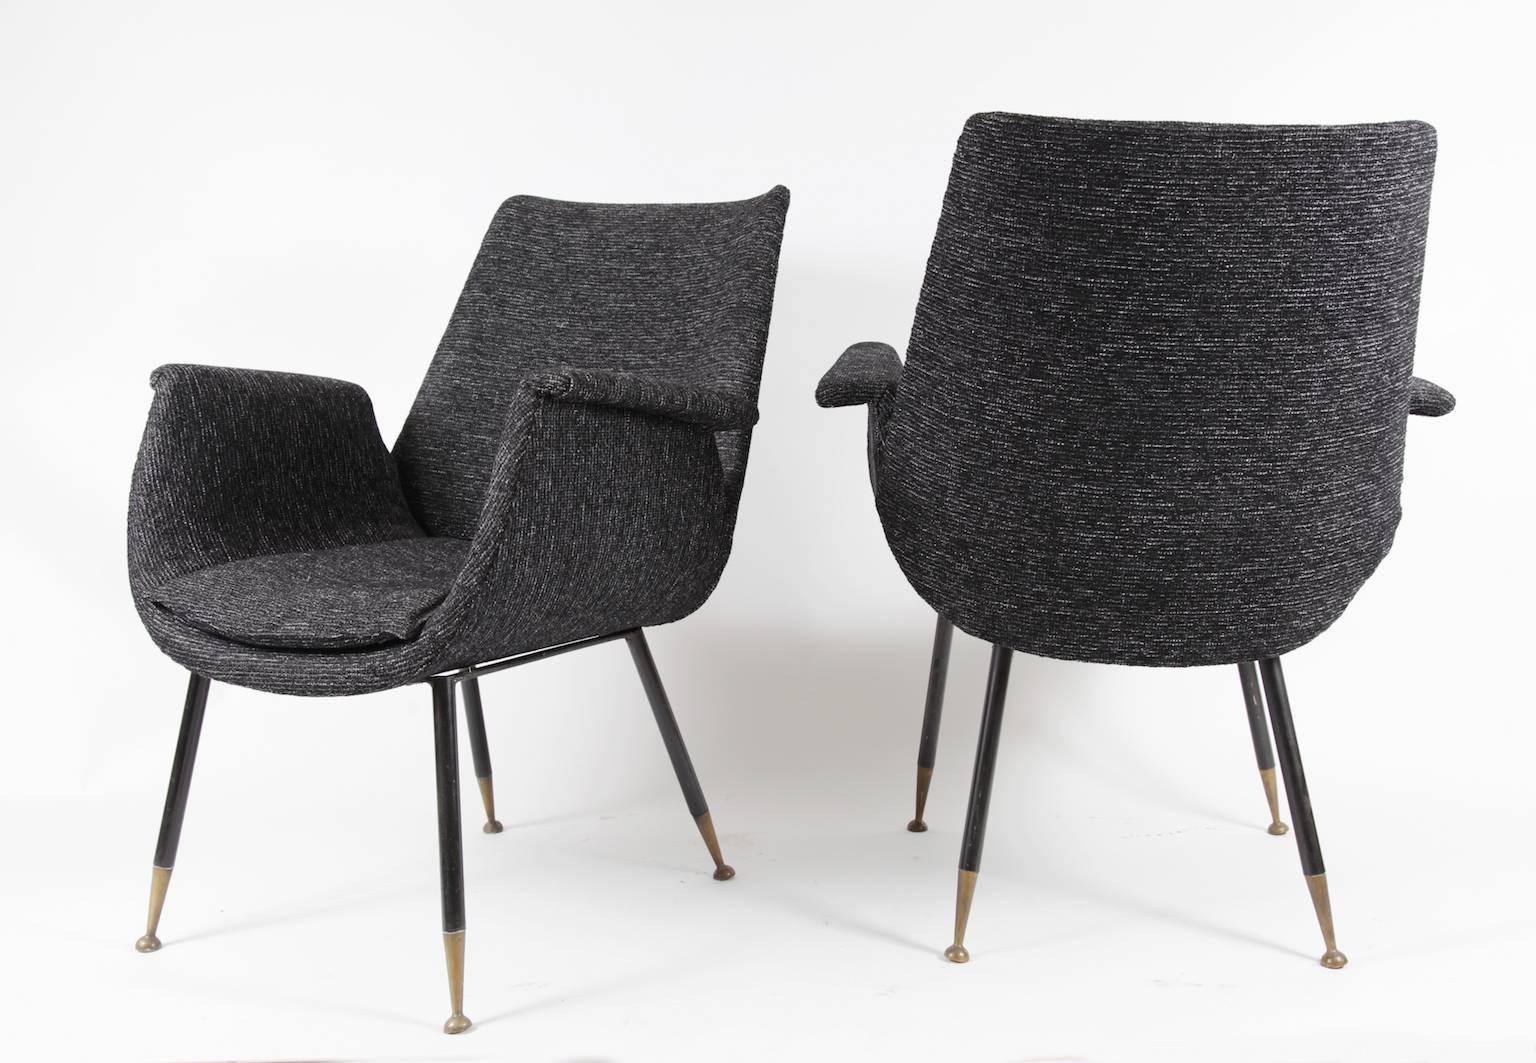 A pair of little armchairs designed by Gastone Rinaldi for RIMA, Padova.
New but original fabric 